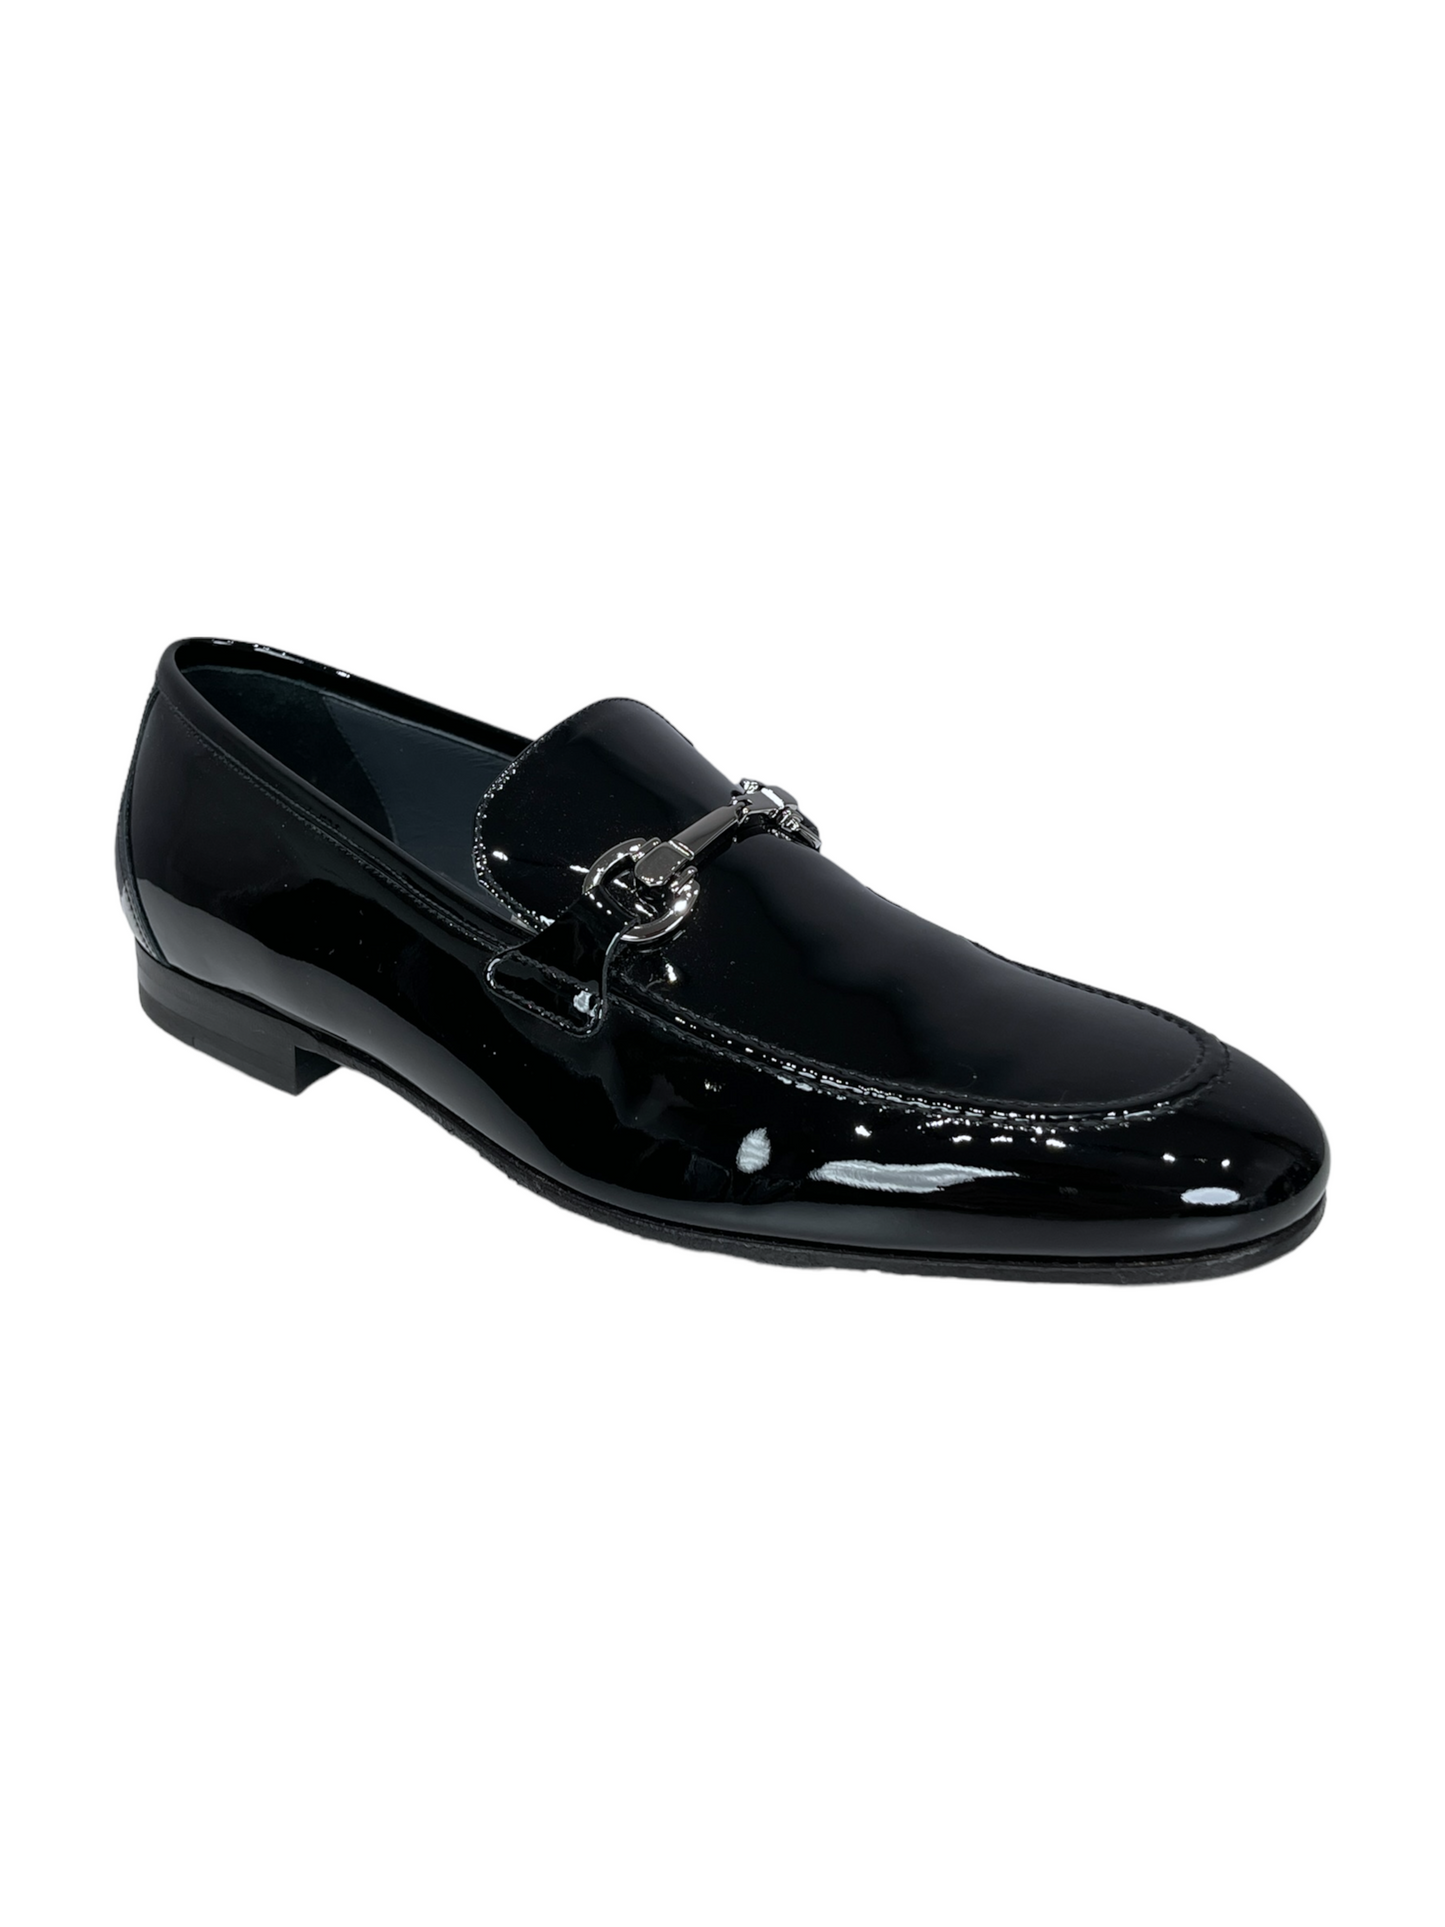 Monte Rosso Rubber Horsebit Loafer - Genuine Design Luxury Consignment for Men. New & Pre-Owned Clothing, Shoes, & Accessories. Calgary, Canada